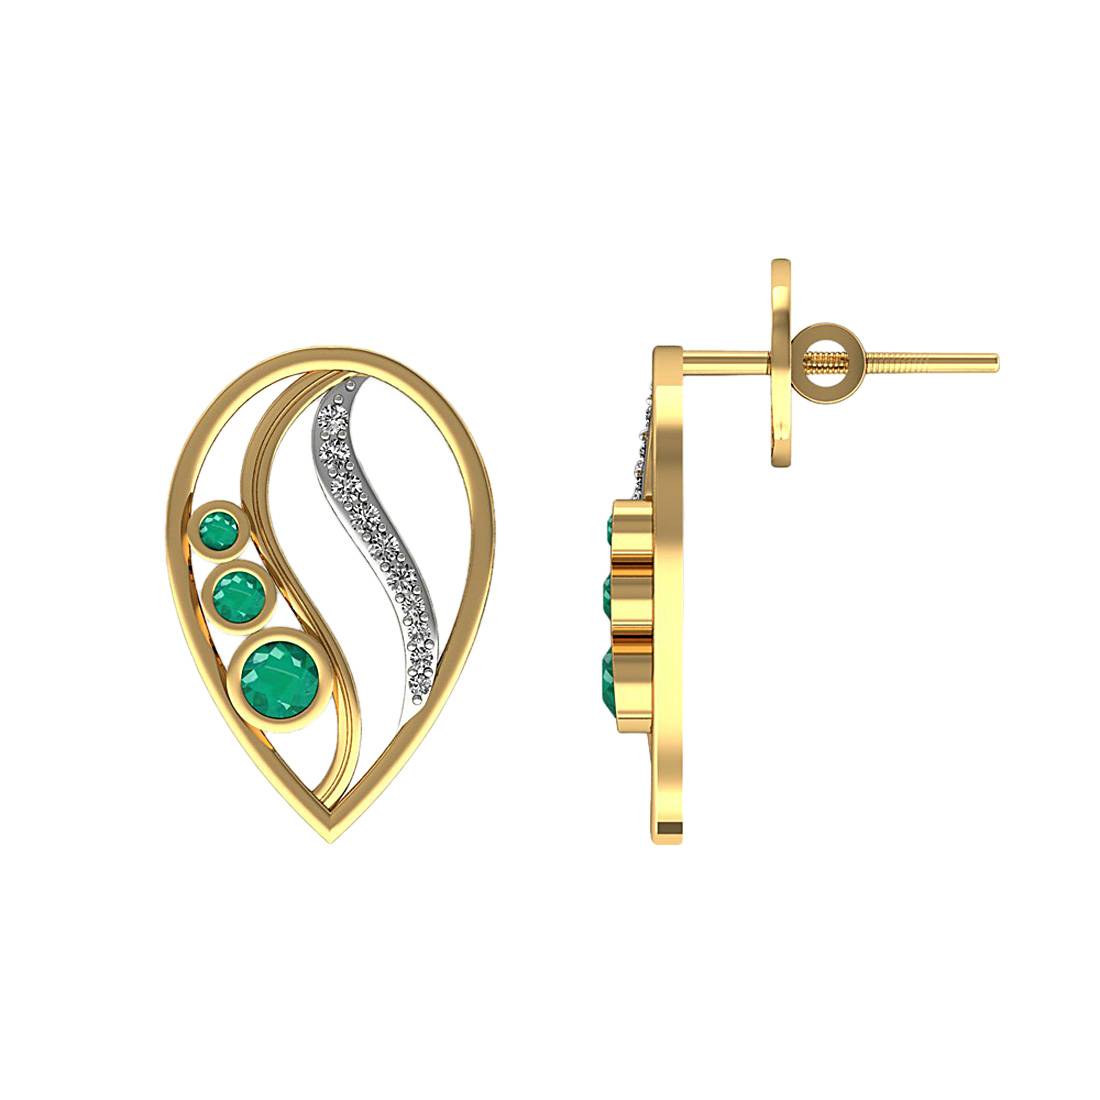 18k solid gold natural diamond stud earrings with emerald